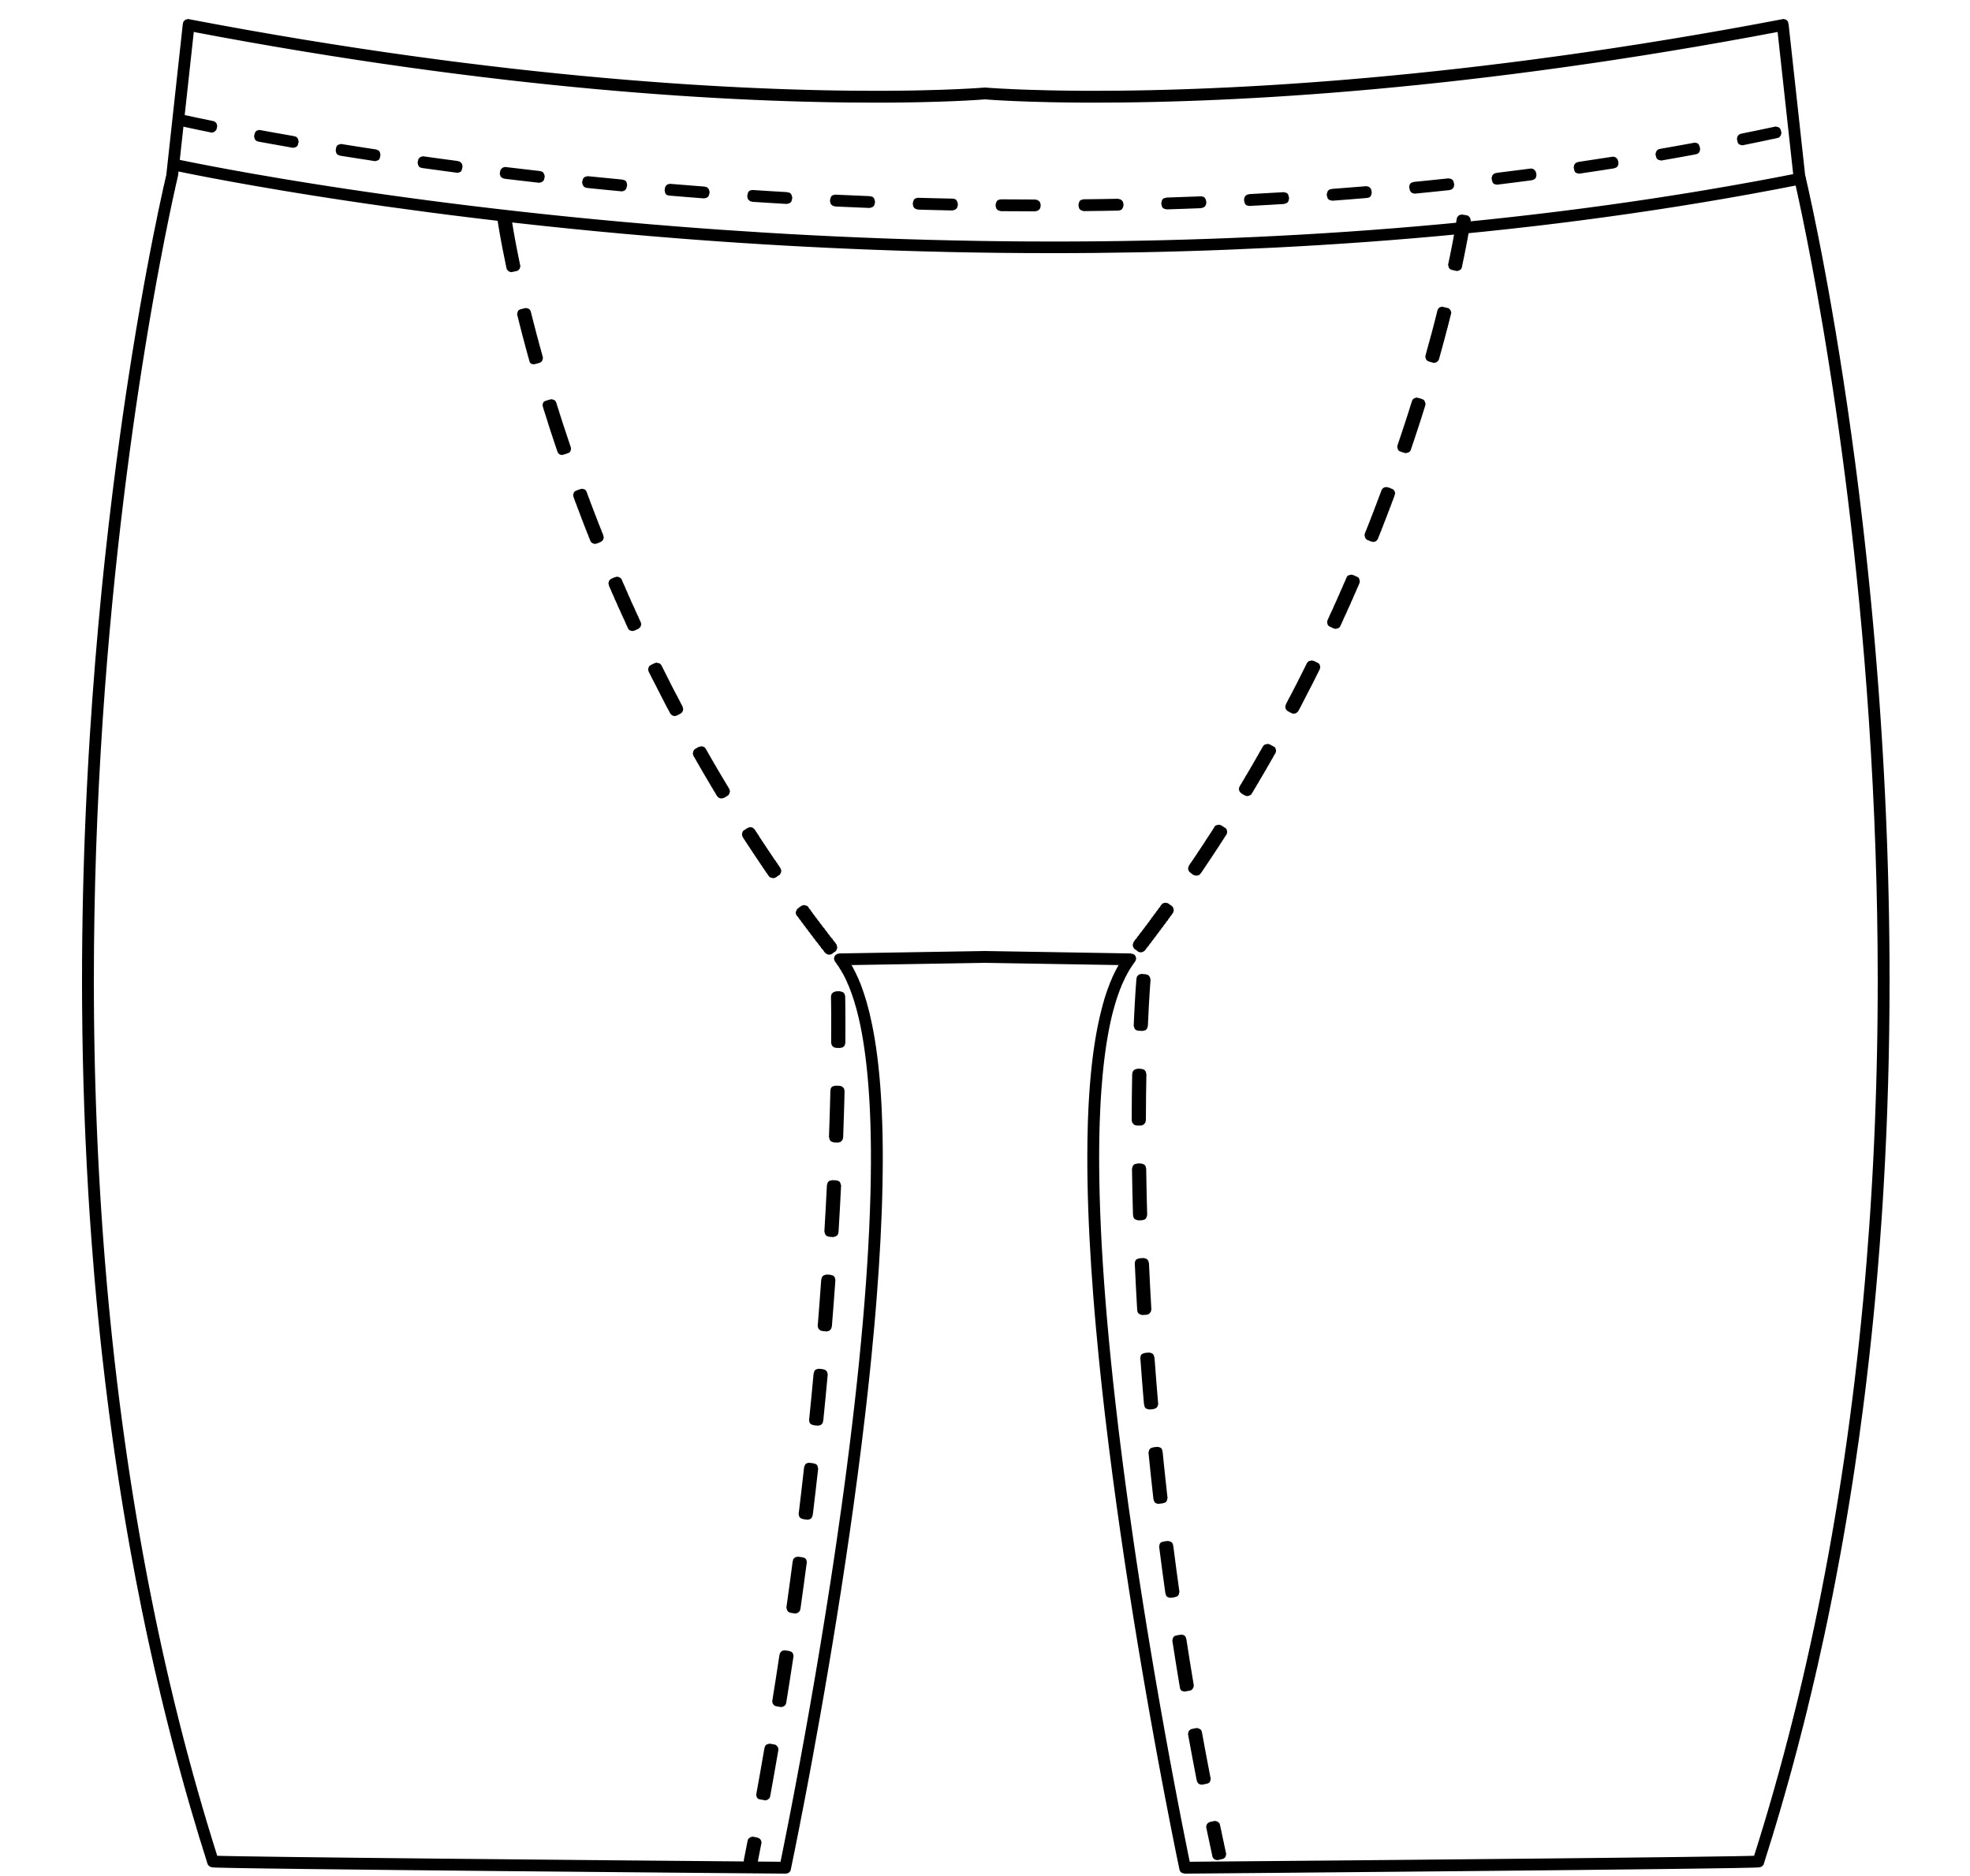 Mens custom bike short pattern for use with latex, vinyl, or other fabrics. thumbnail image.